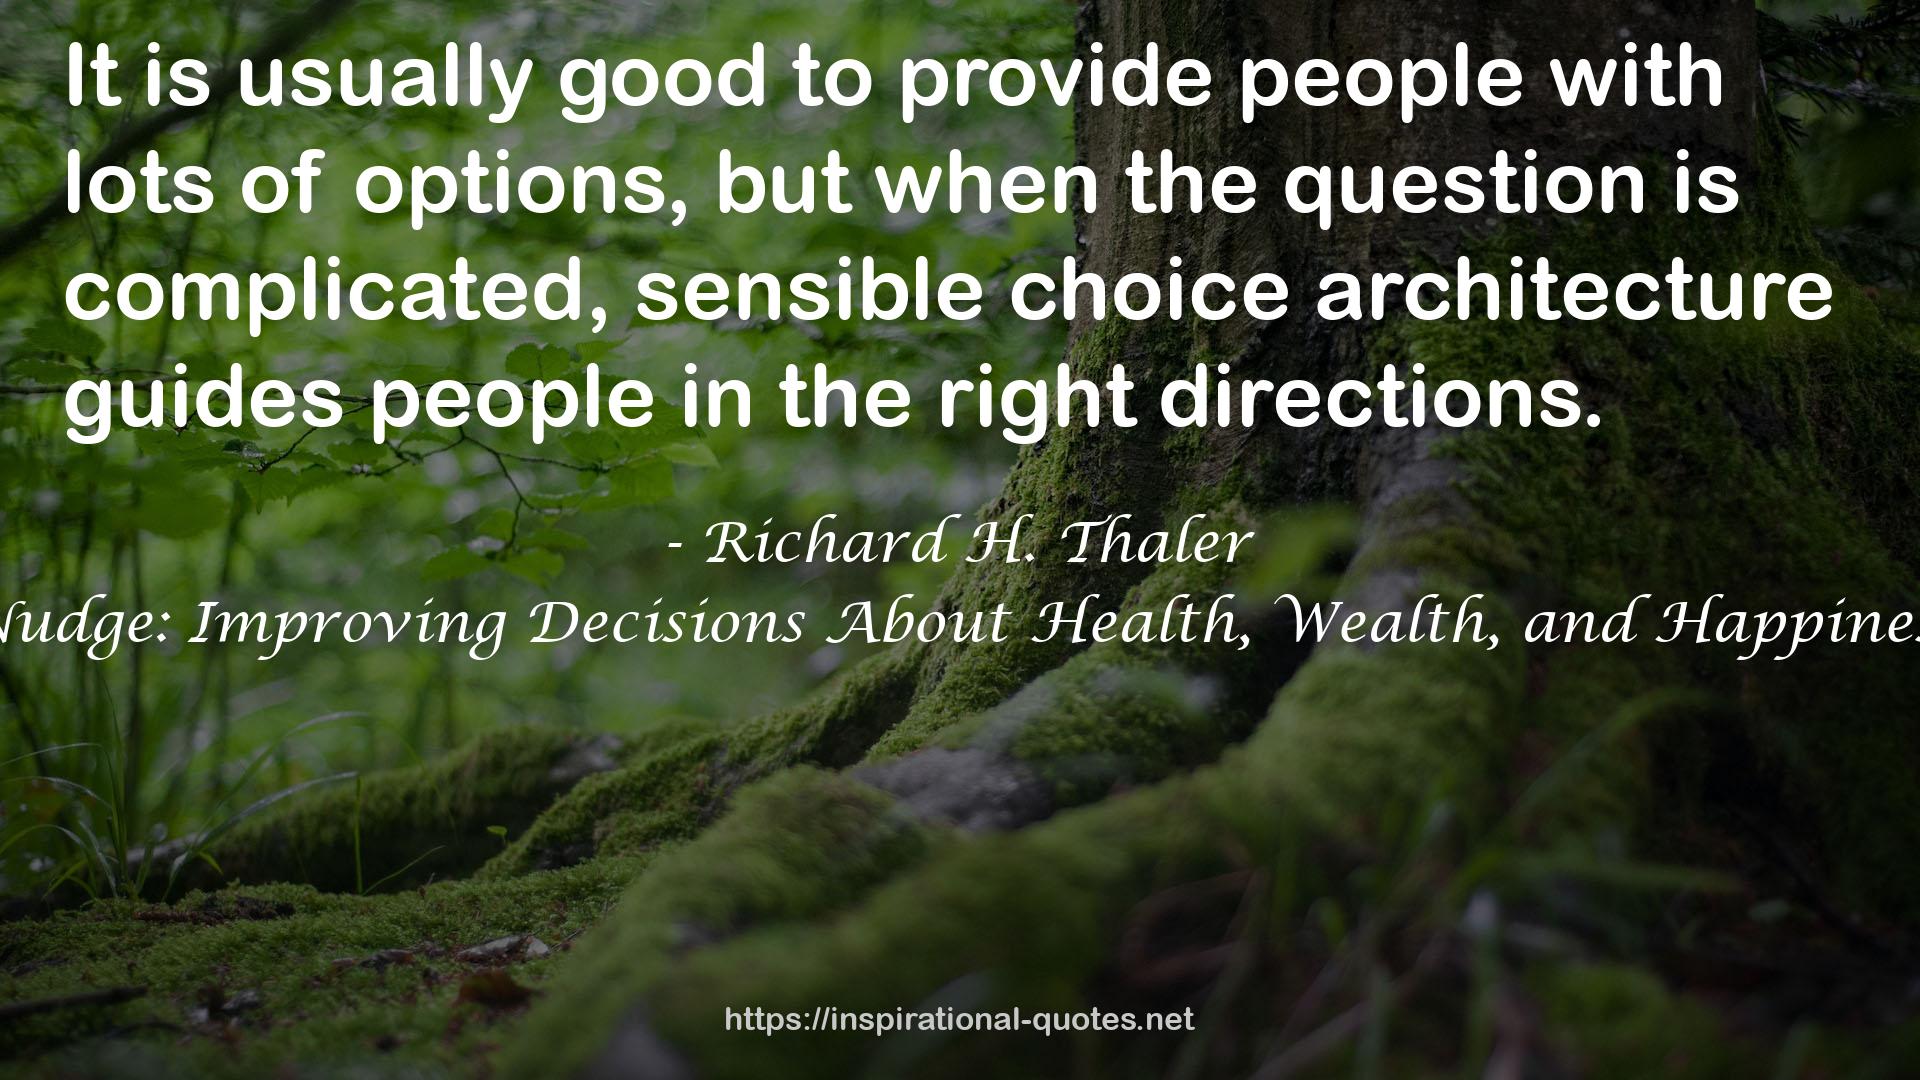 Nudge: Improving Decisions About Health, Wealth, and Happiness QUOTES